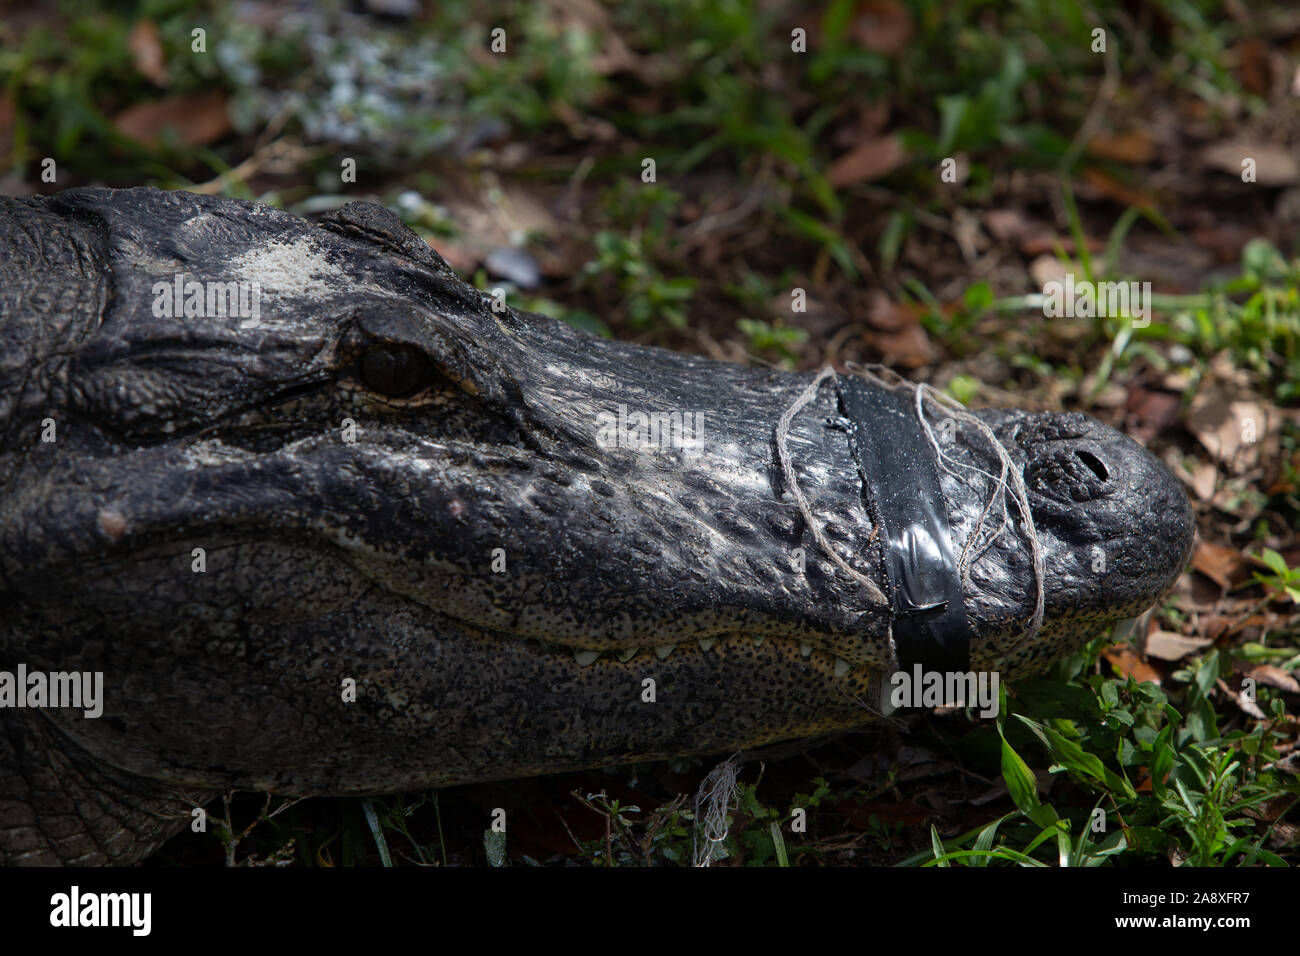 Alligator in Captivity  with tape holding its mouth shut. Stock Photo